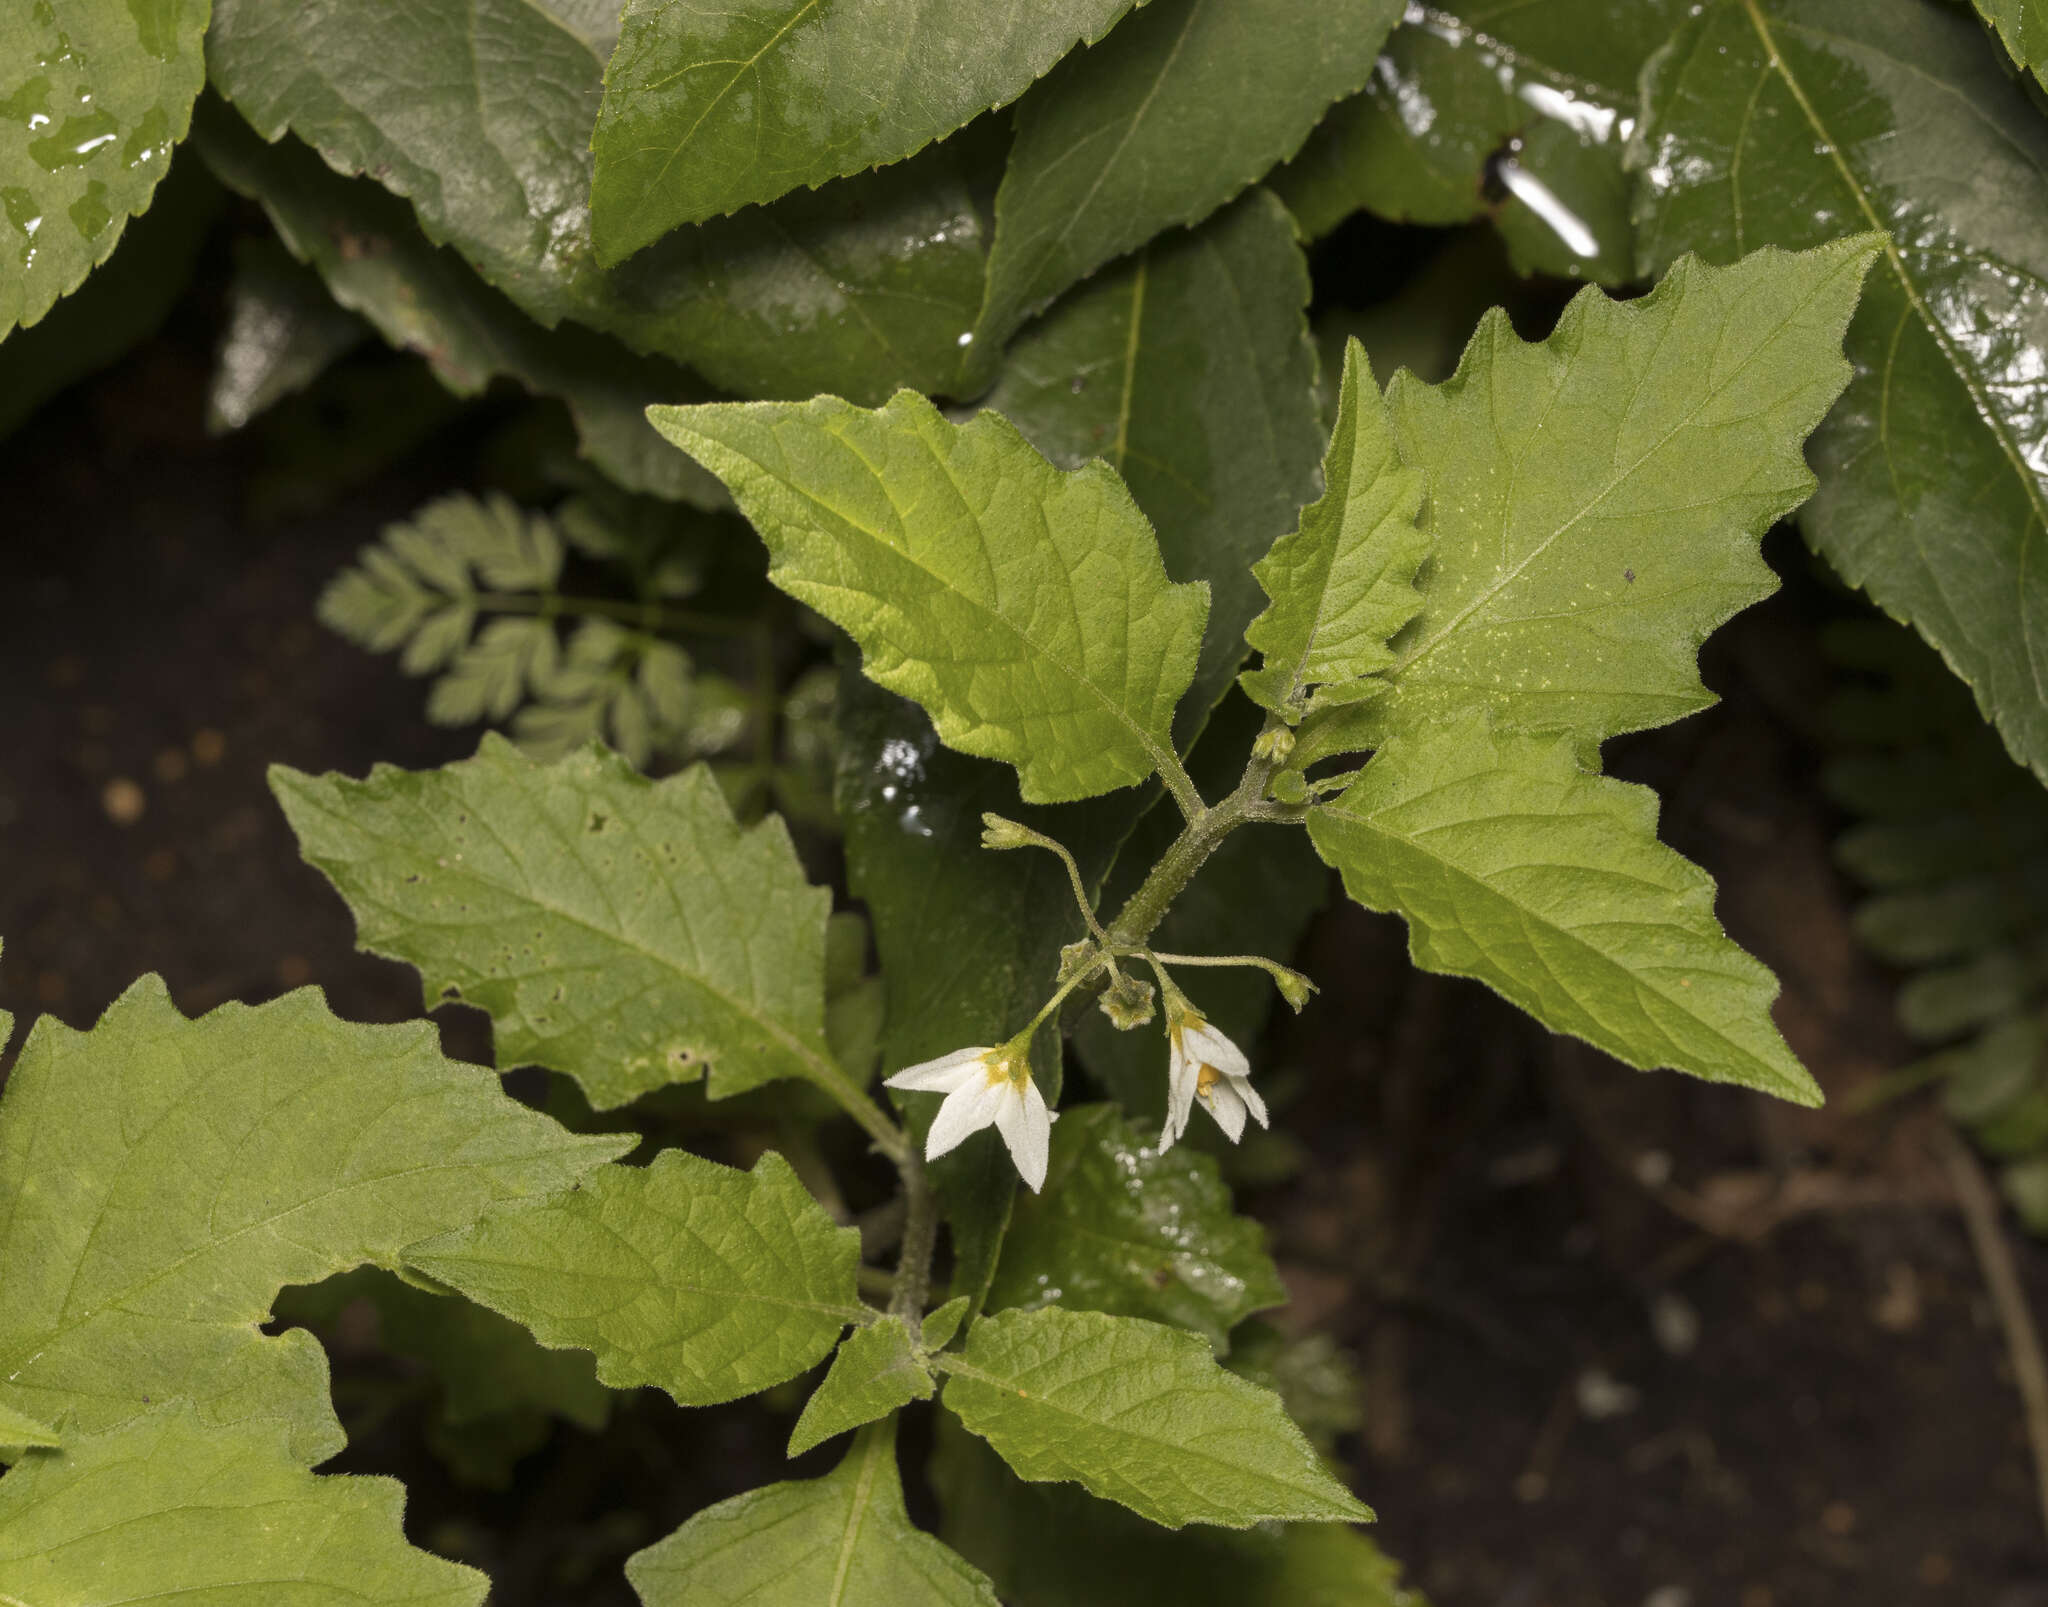 Image of forked nightshade